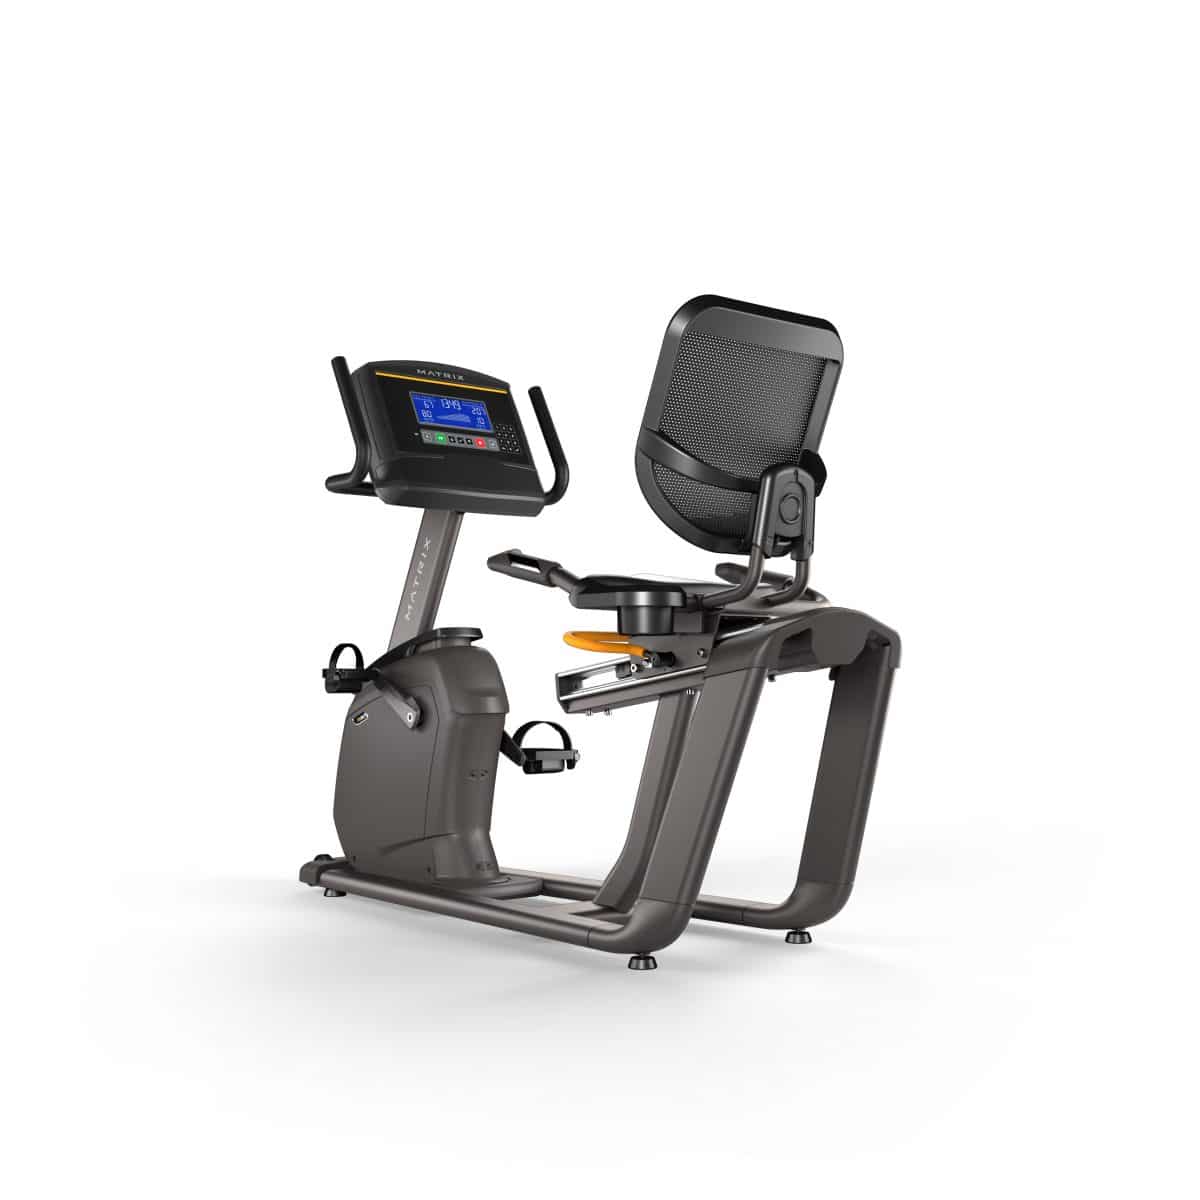 The recumbent exercise bike is shown on a white background.